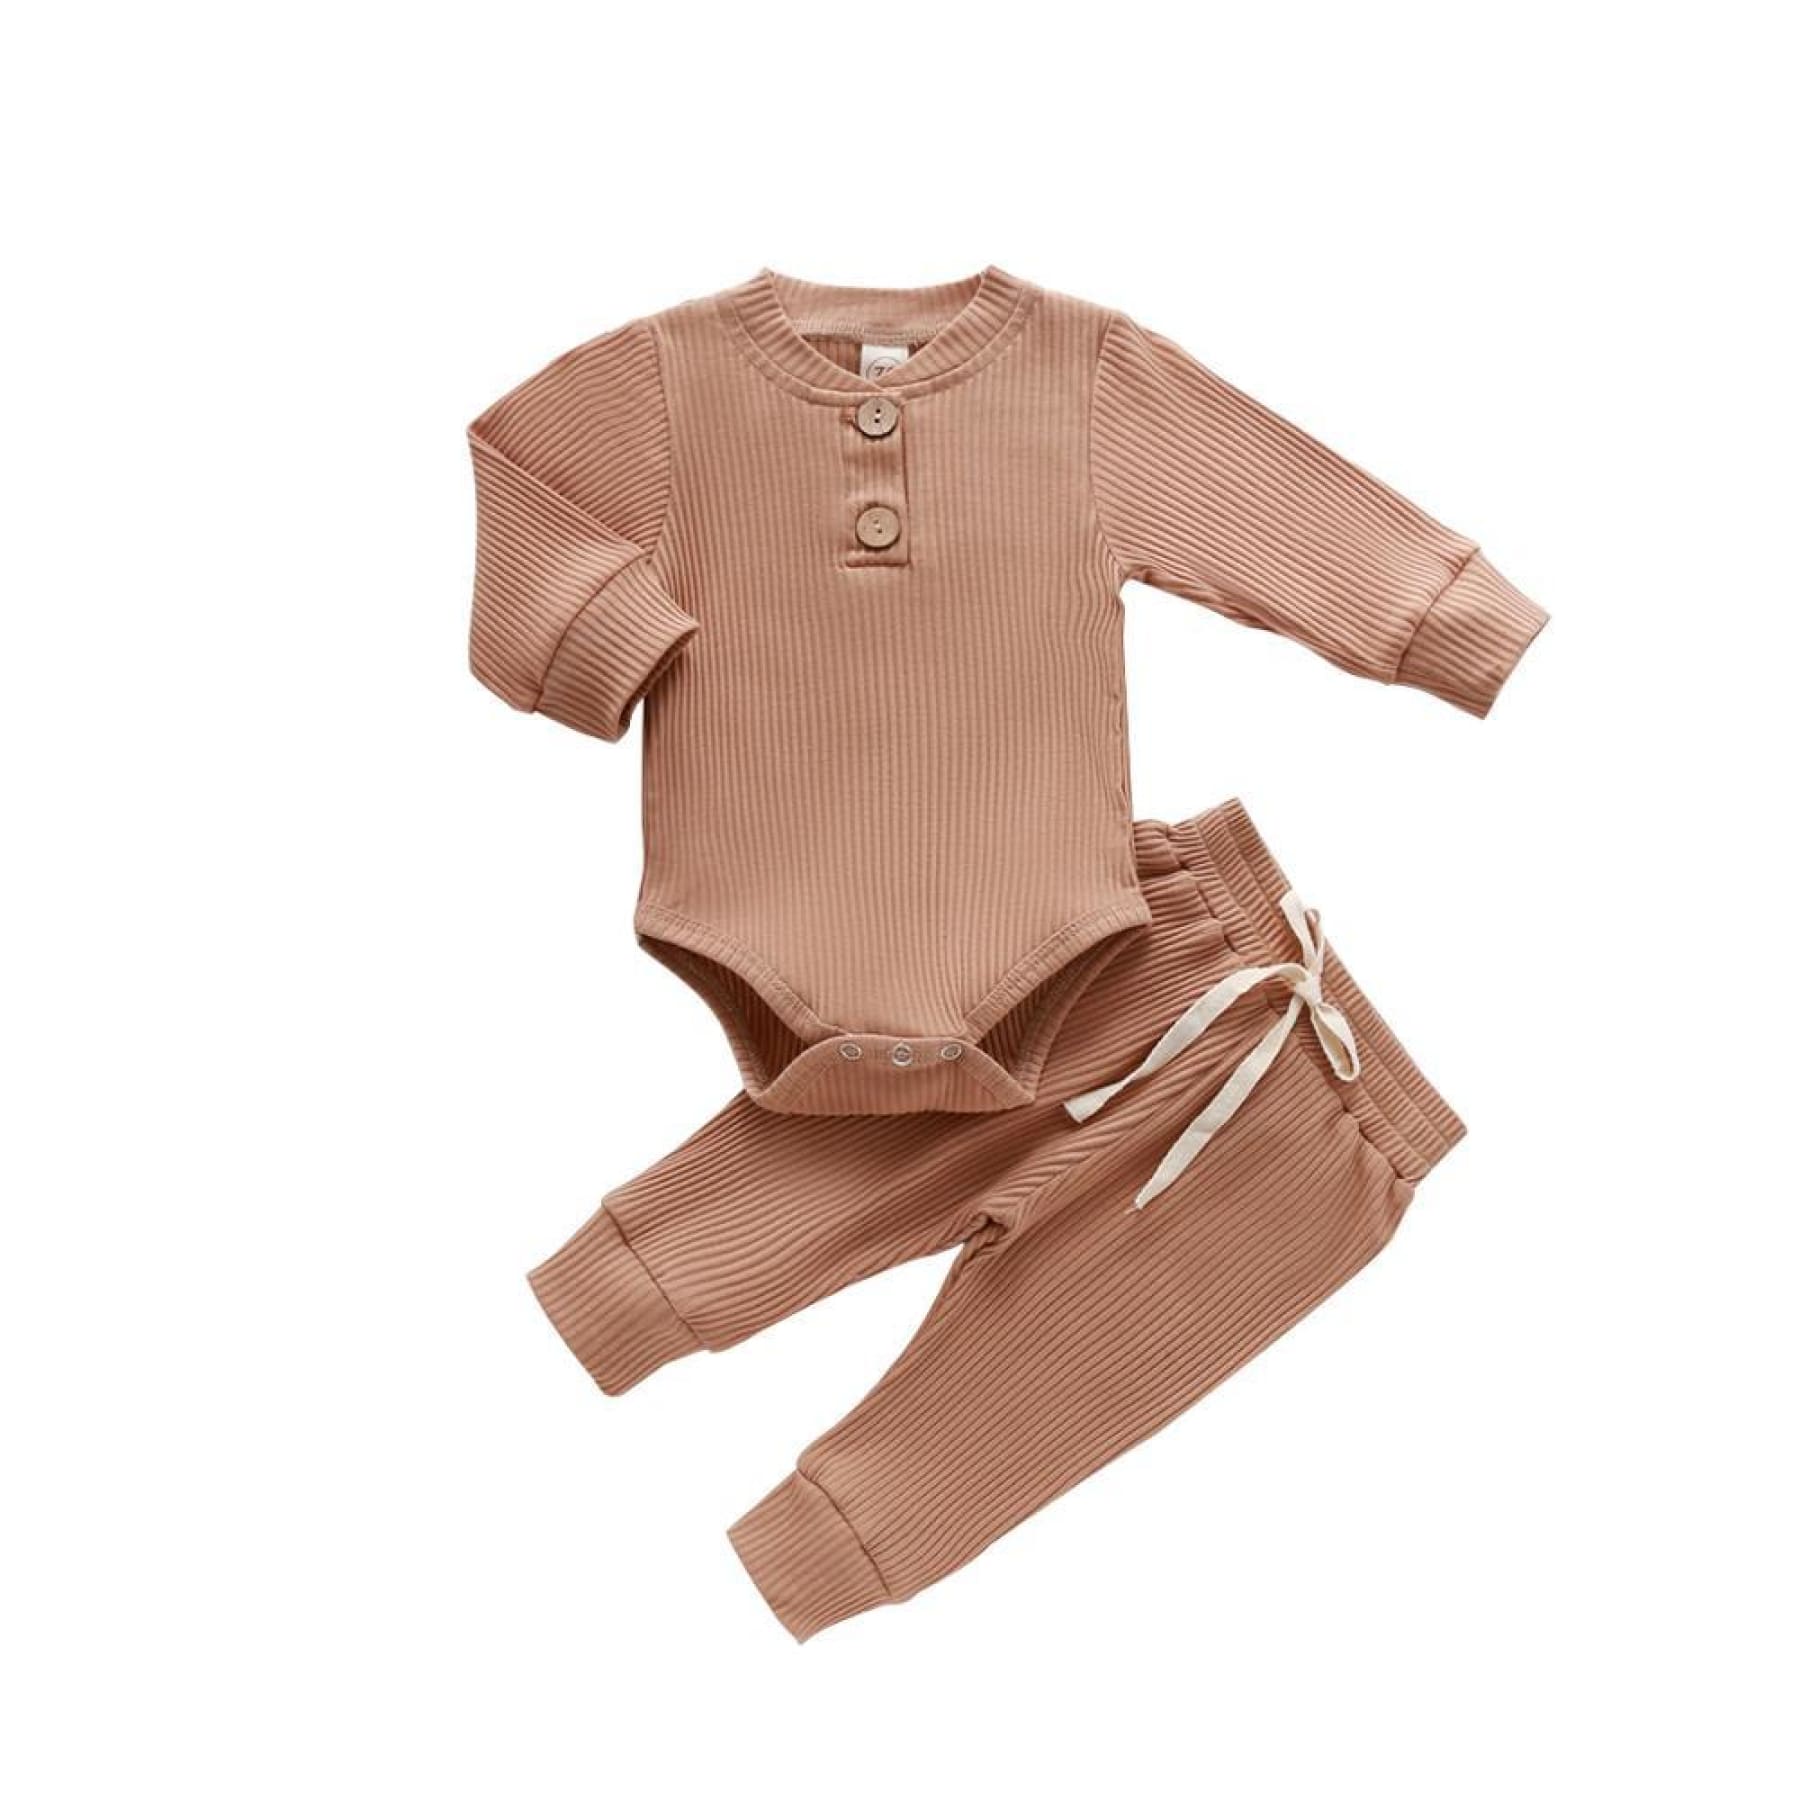 brown baby track suit with romper or onesie and pants- Hunny Bubba Kids